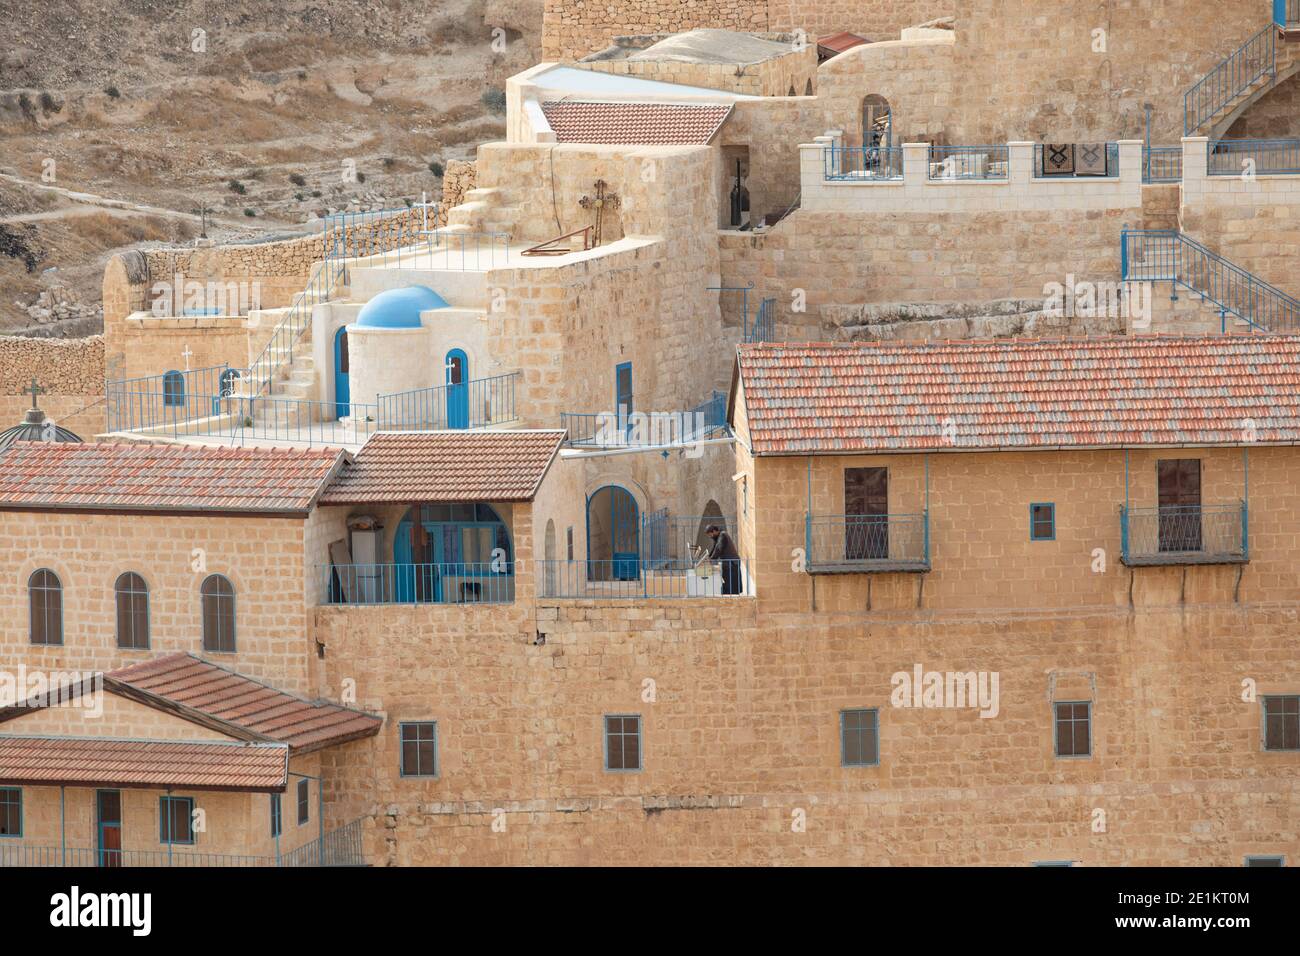 The Holy Lavra of Saint Sabbas, known in Syriac as Mar Saba is a Greek Orthodox monastery overlooking the Kidron Valley at a point halfway between the Stock Photo